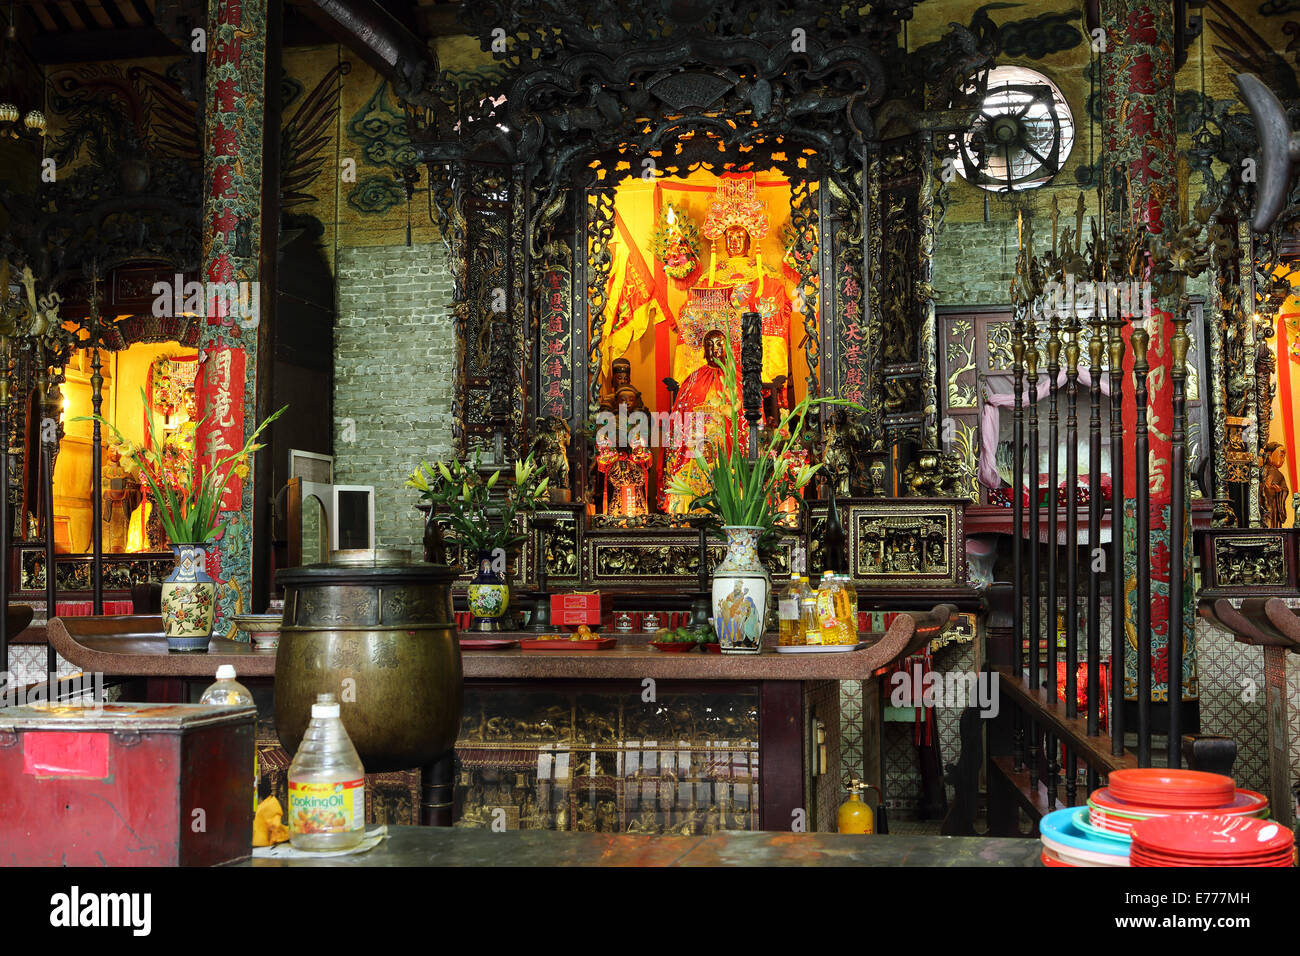 The altar of the Thien Hau Temple in the Cholon district of Ho Chi Minh City, Vietnam. Stock Photo